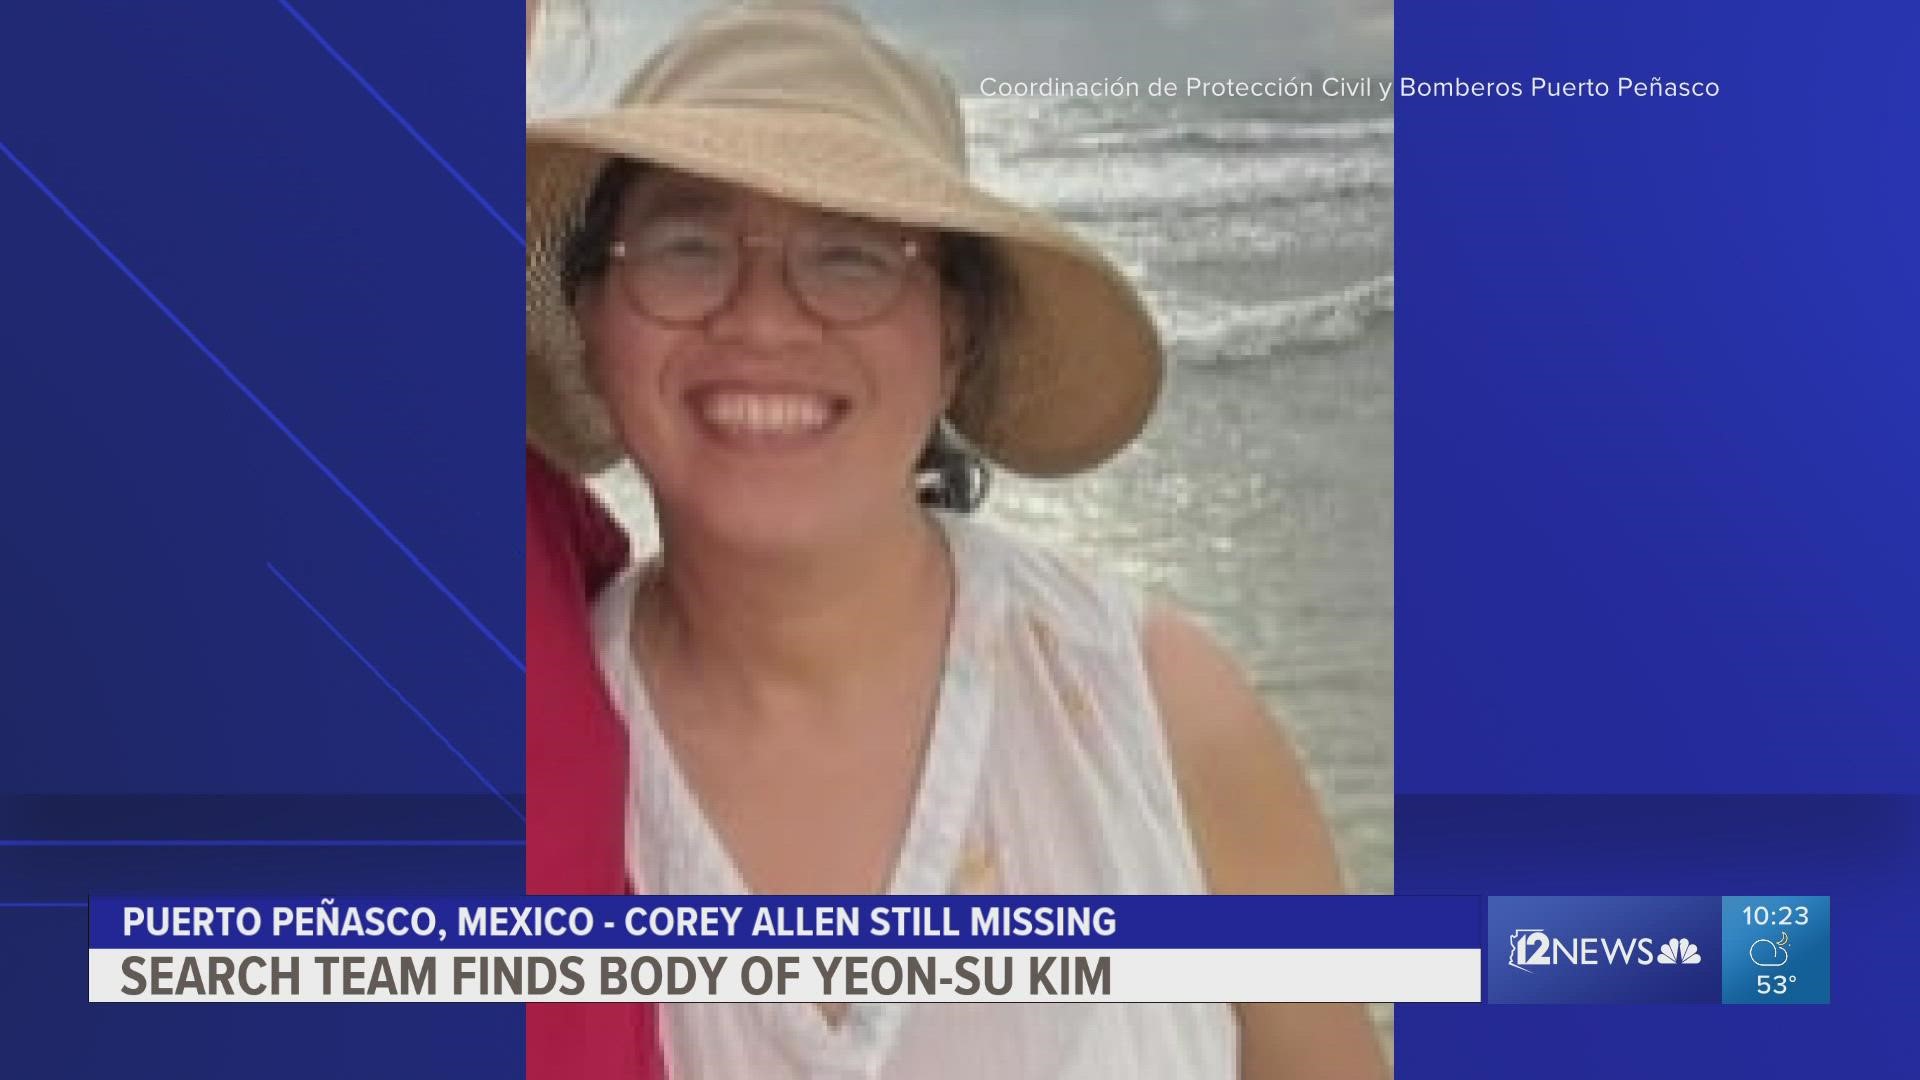 Mexican officials said the family confirmed the body found was that of Yeon-Su Kim.